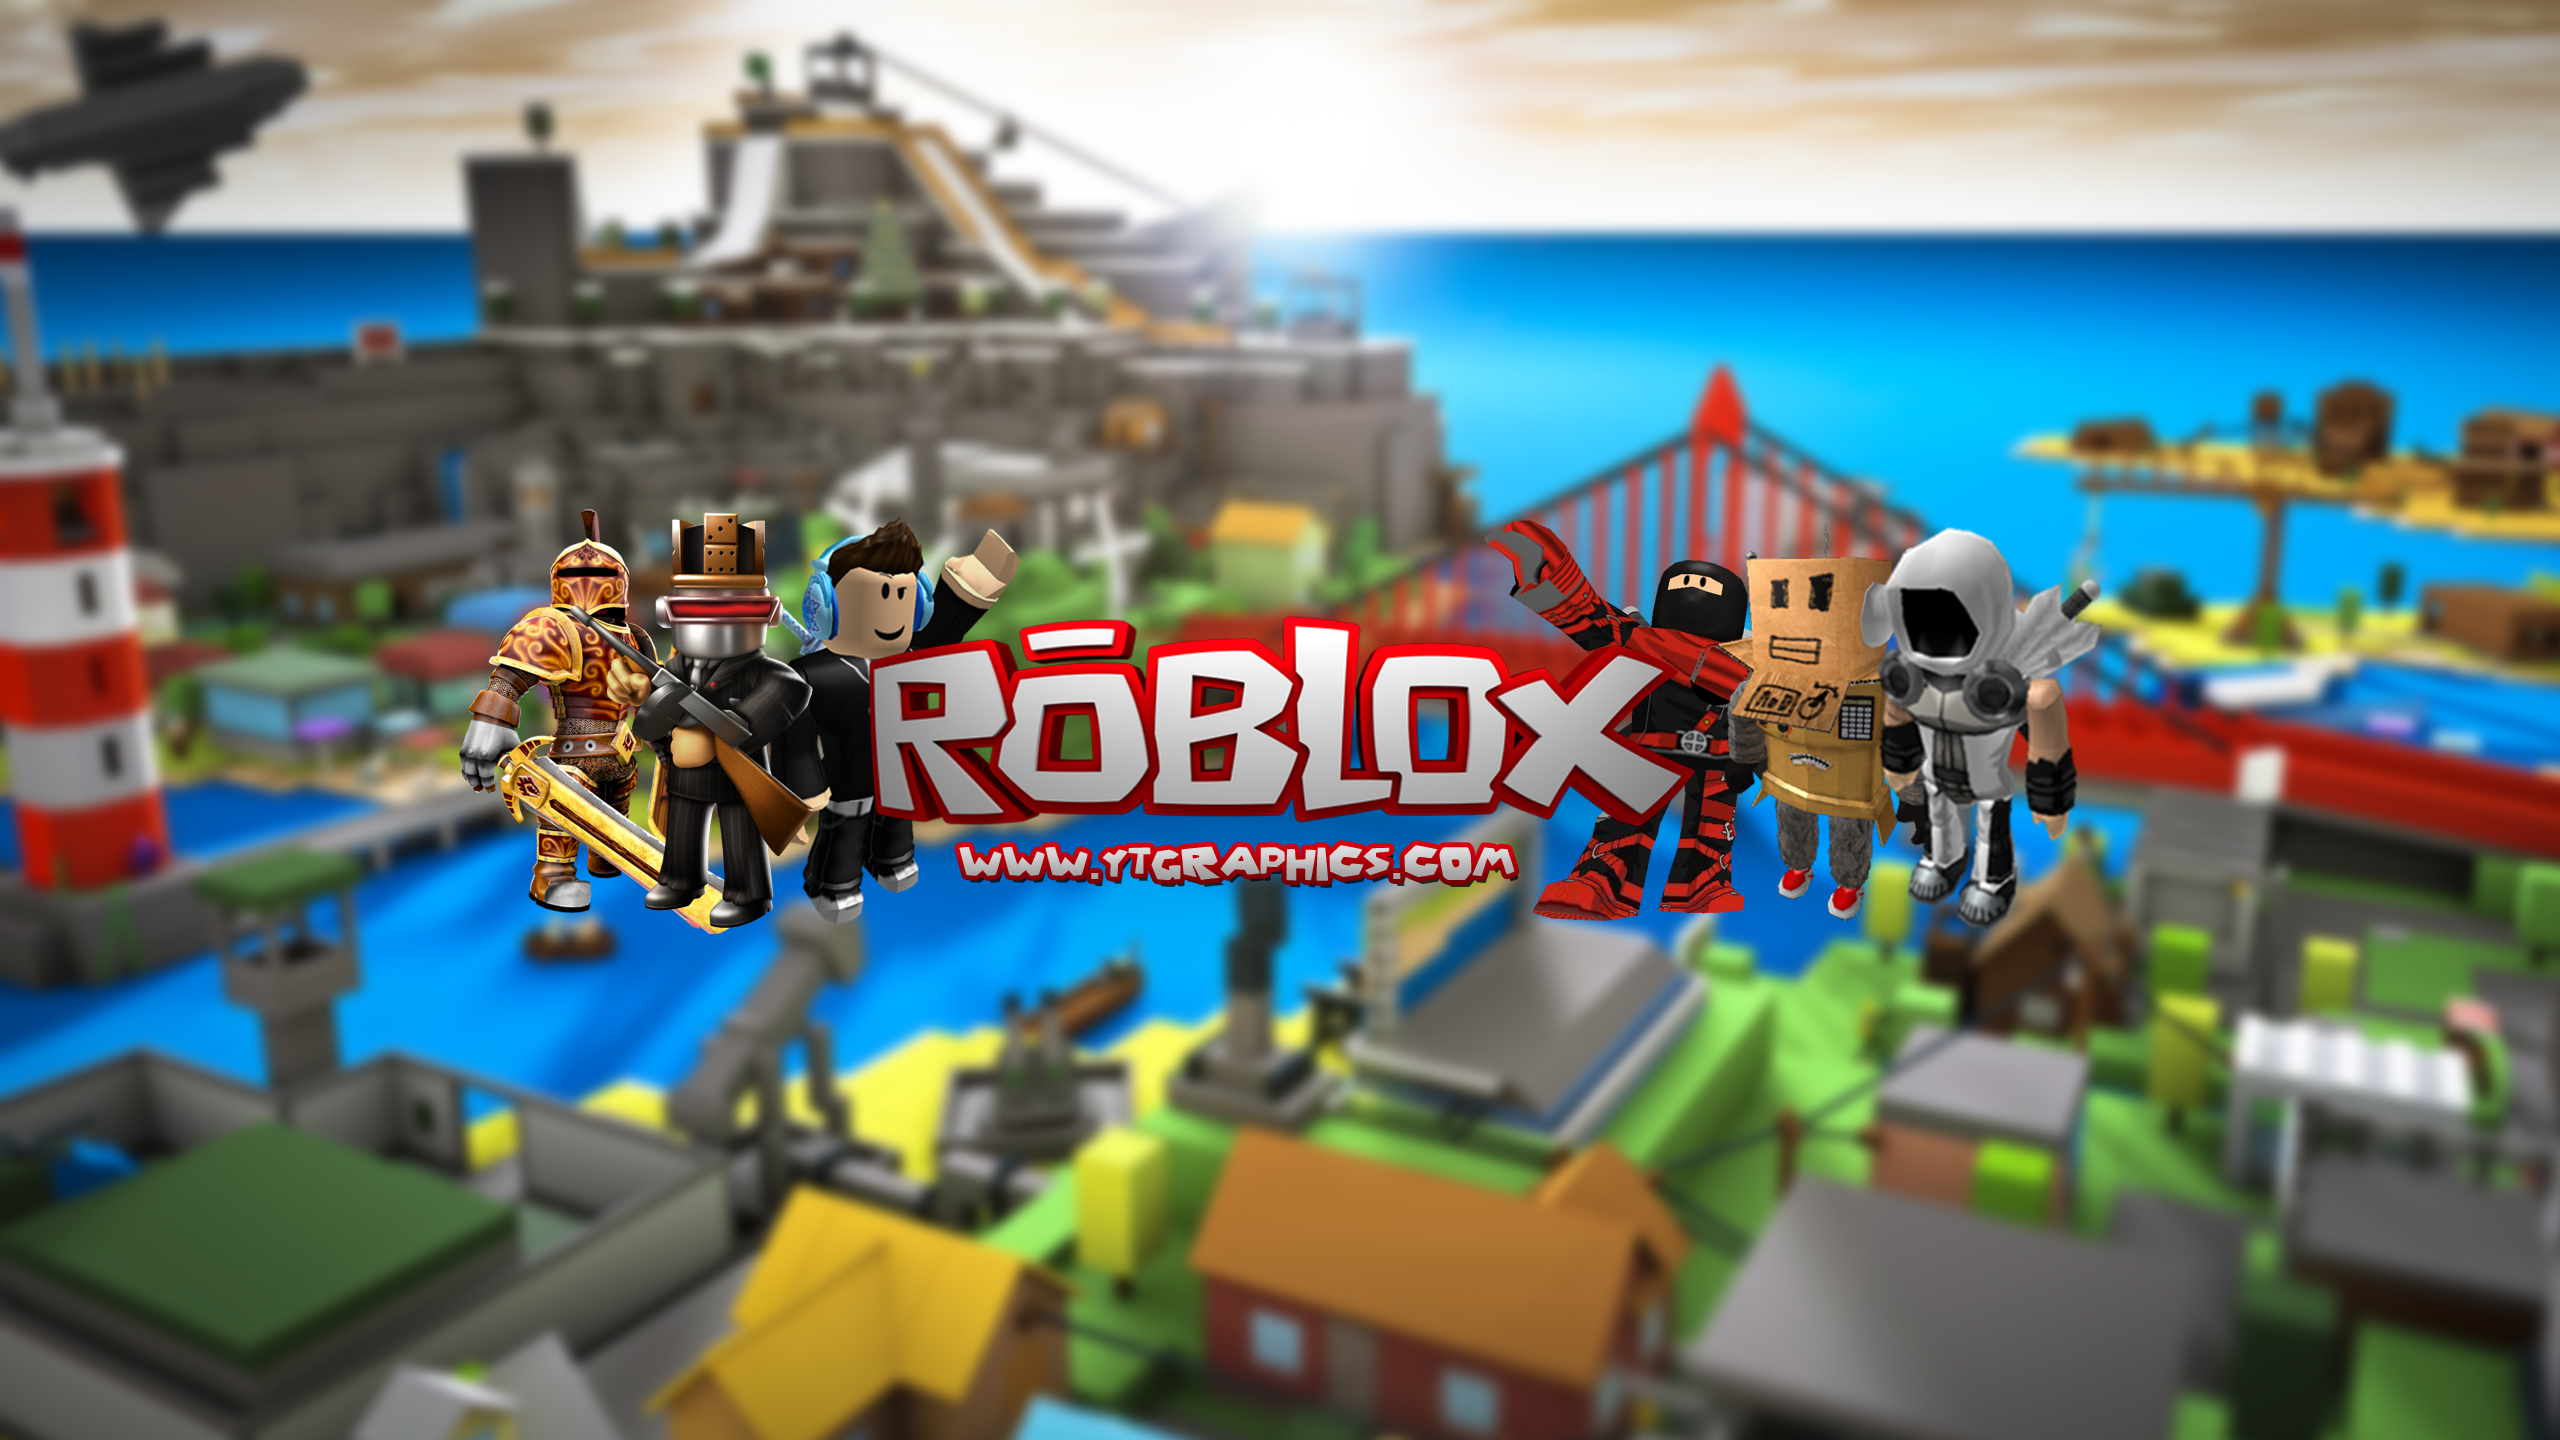 ROBLOX - YouTube Channel Art Banners